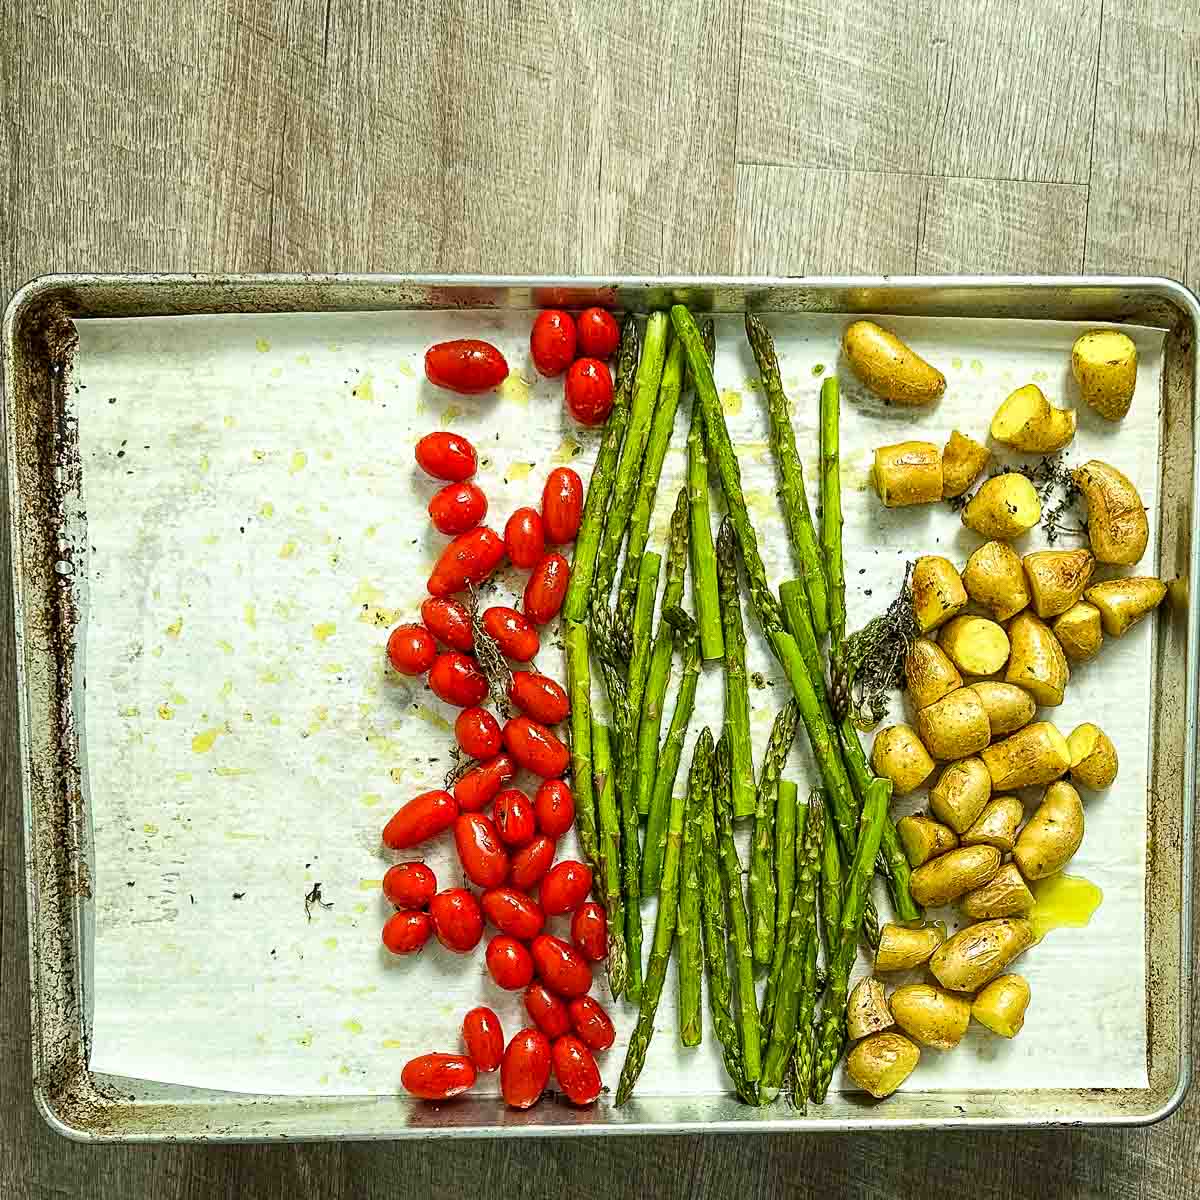 A lined sheet pan with half-roasted fingerling potatoes, asparagus, and cherry tomatoes.